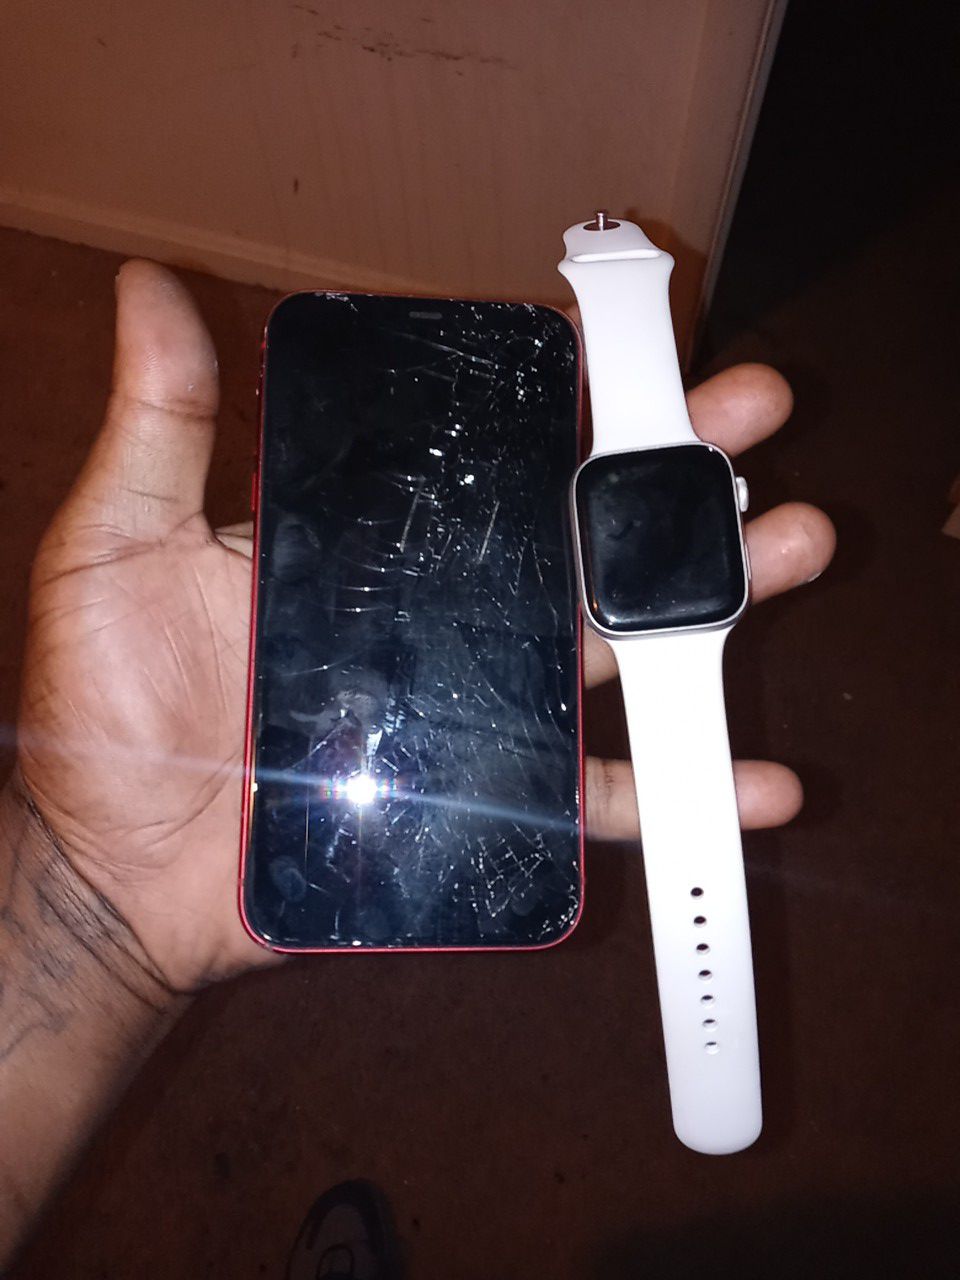 340 apple watch 5 and iphone 11 unlock u can't beat it